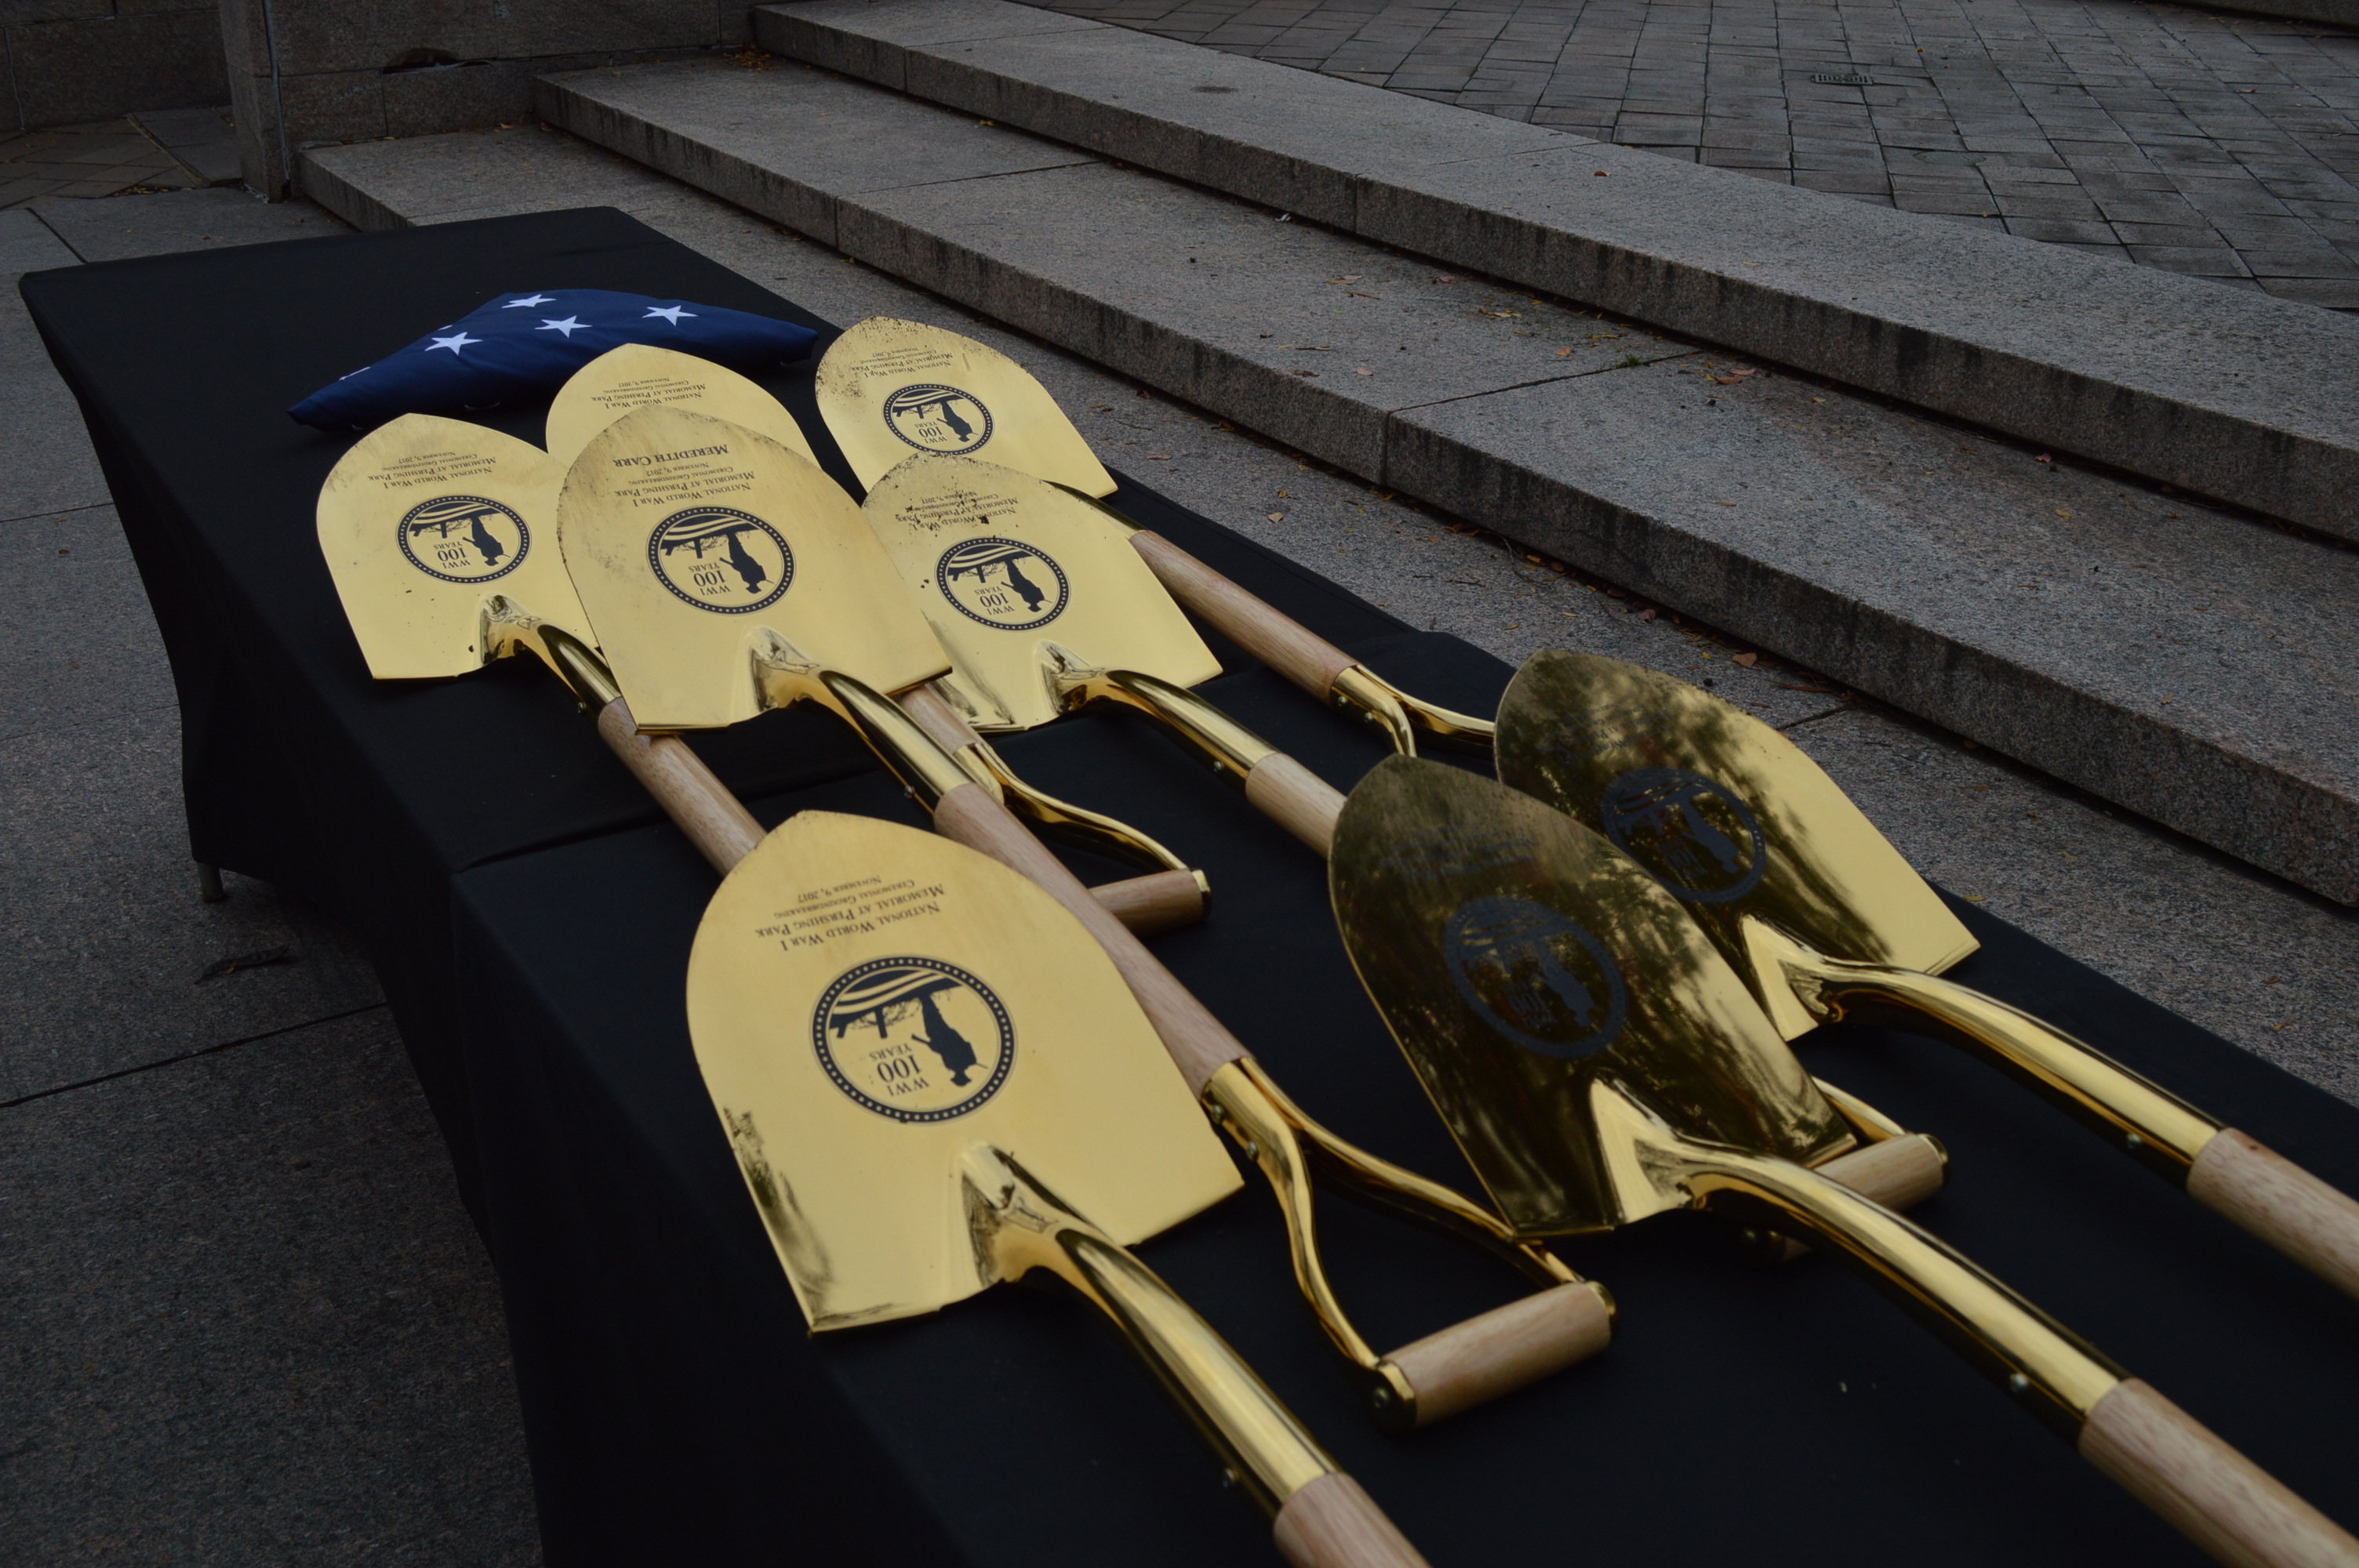 Shovels used for the groundbreaking ceremony for the new World War I Memorial in Washington, D.C. (Anthony C. Hayes)